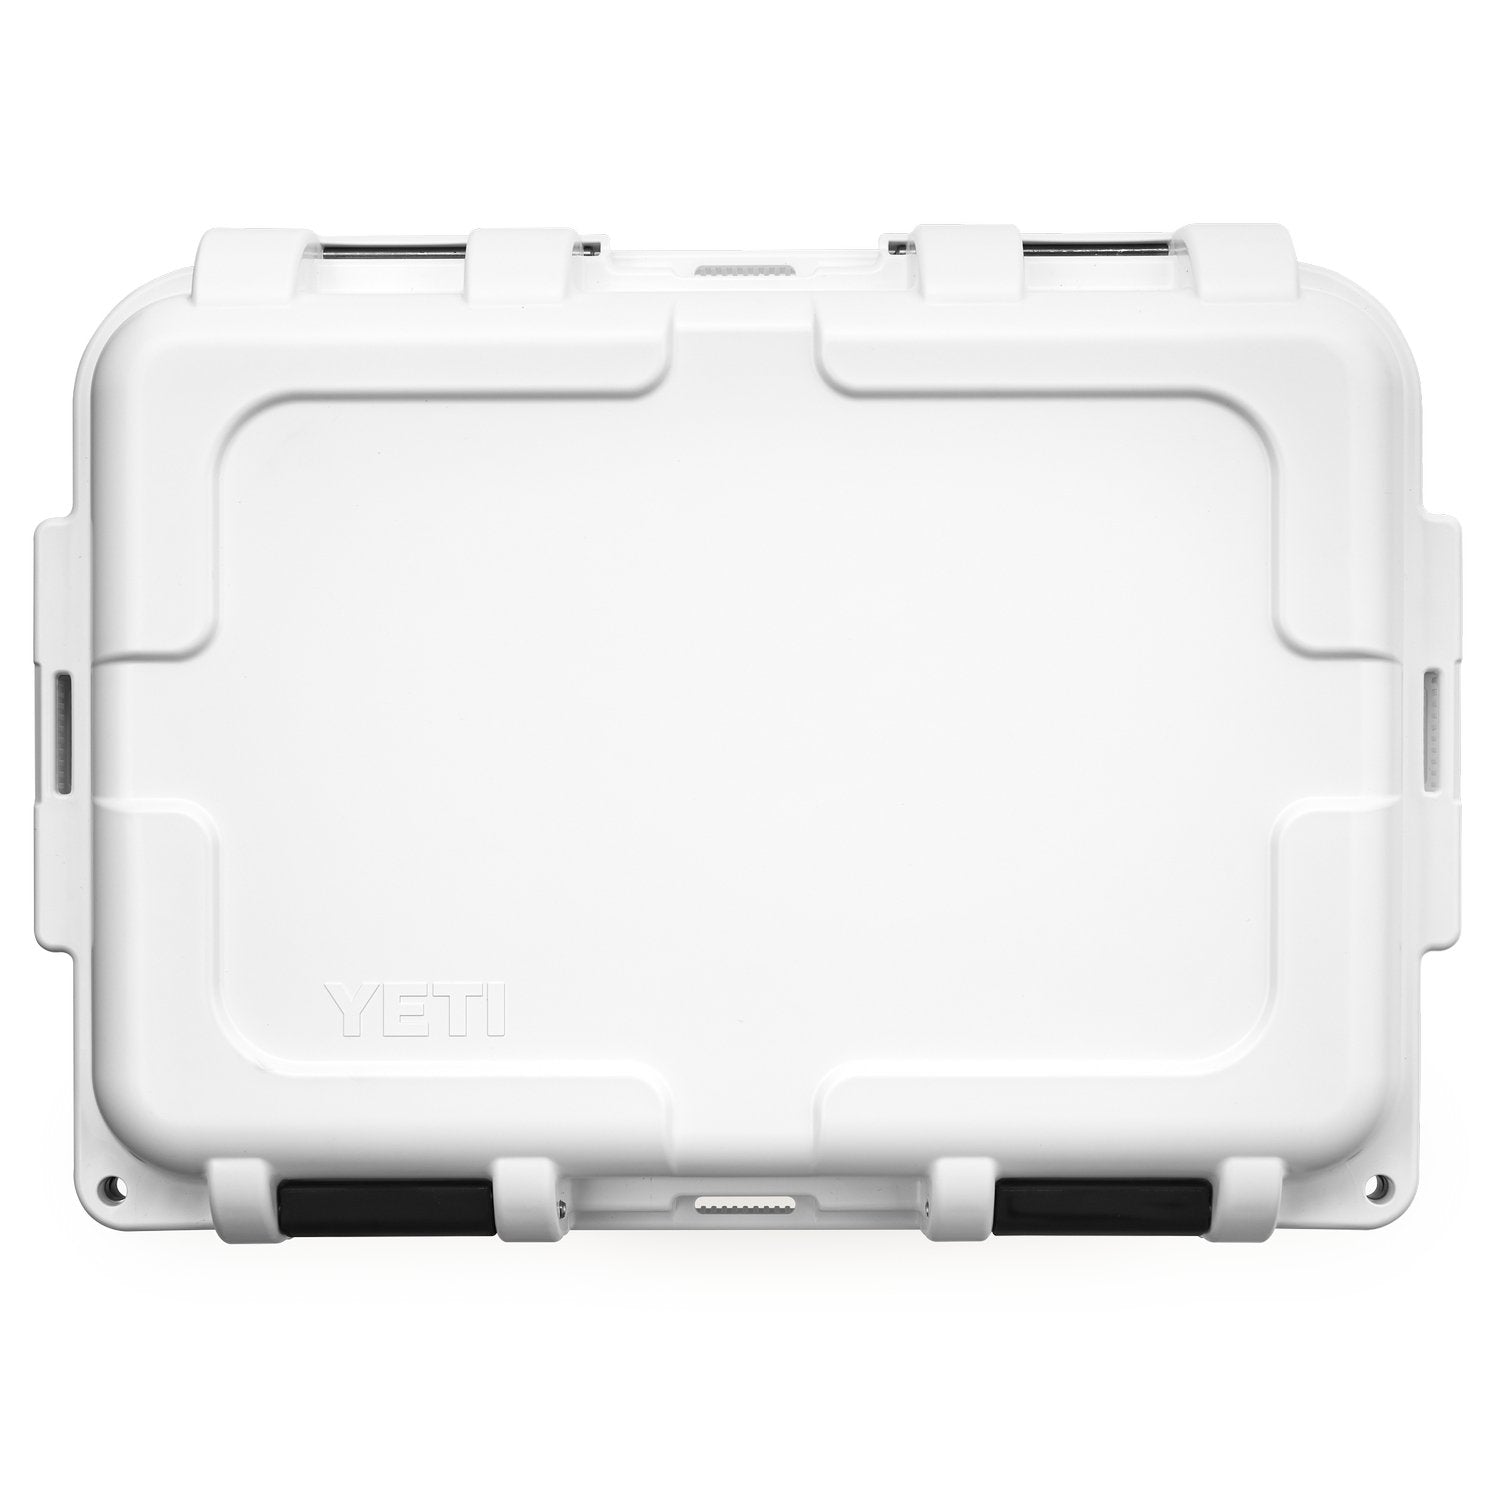 190901-Studio-Dealers-Images-Go-Box-Lid-Closed-Top-Down-White-2400x2400.jpg